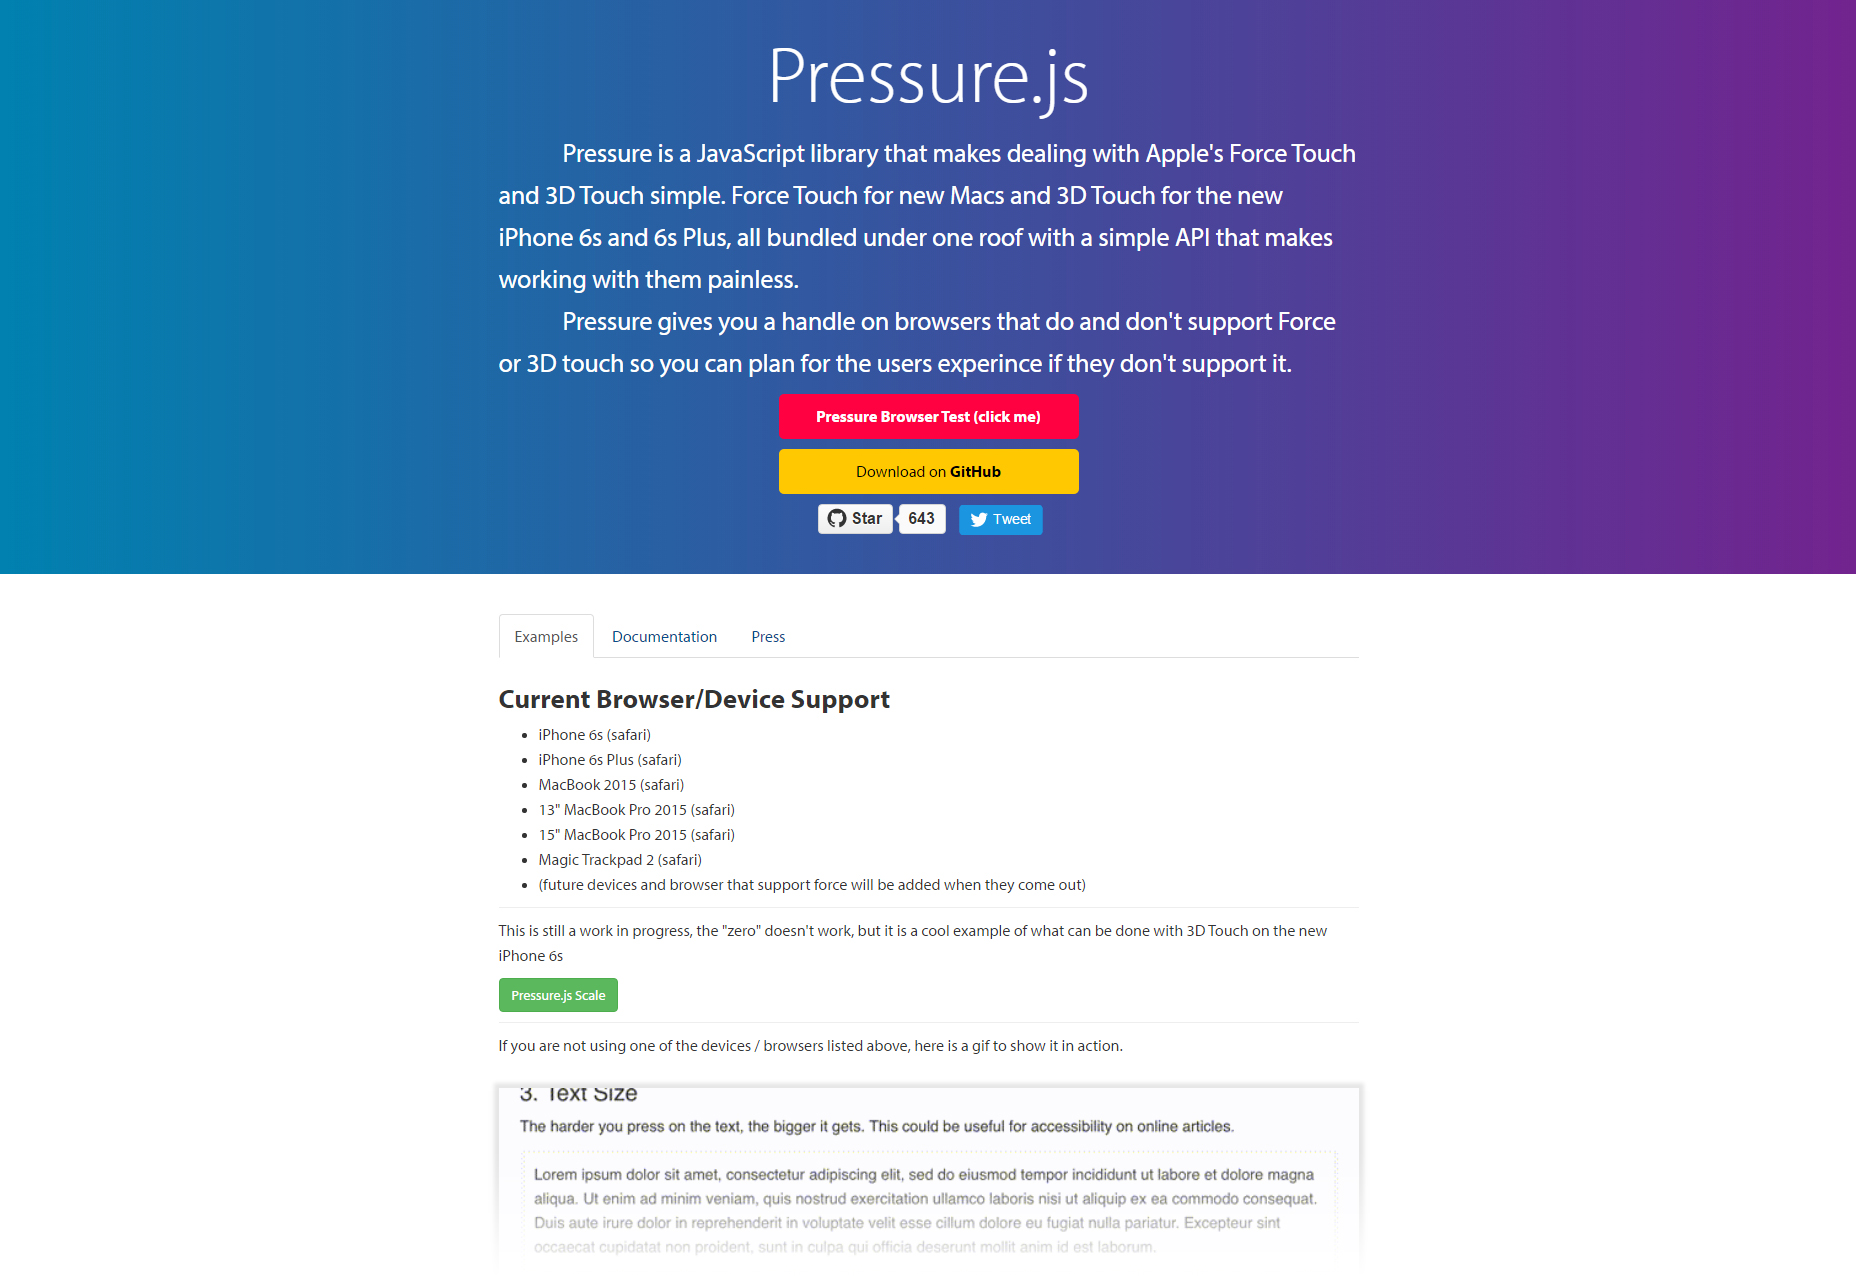 Pressure: Single API Force & 3D Touch JavaScript Library